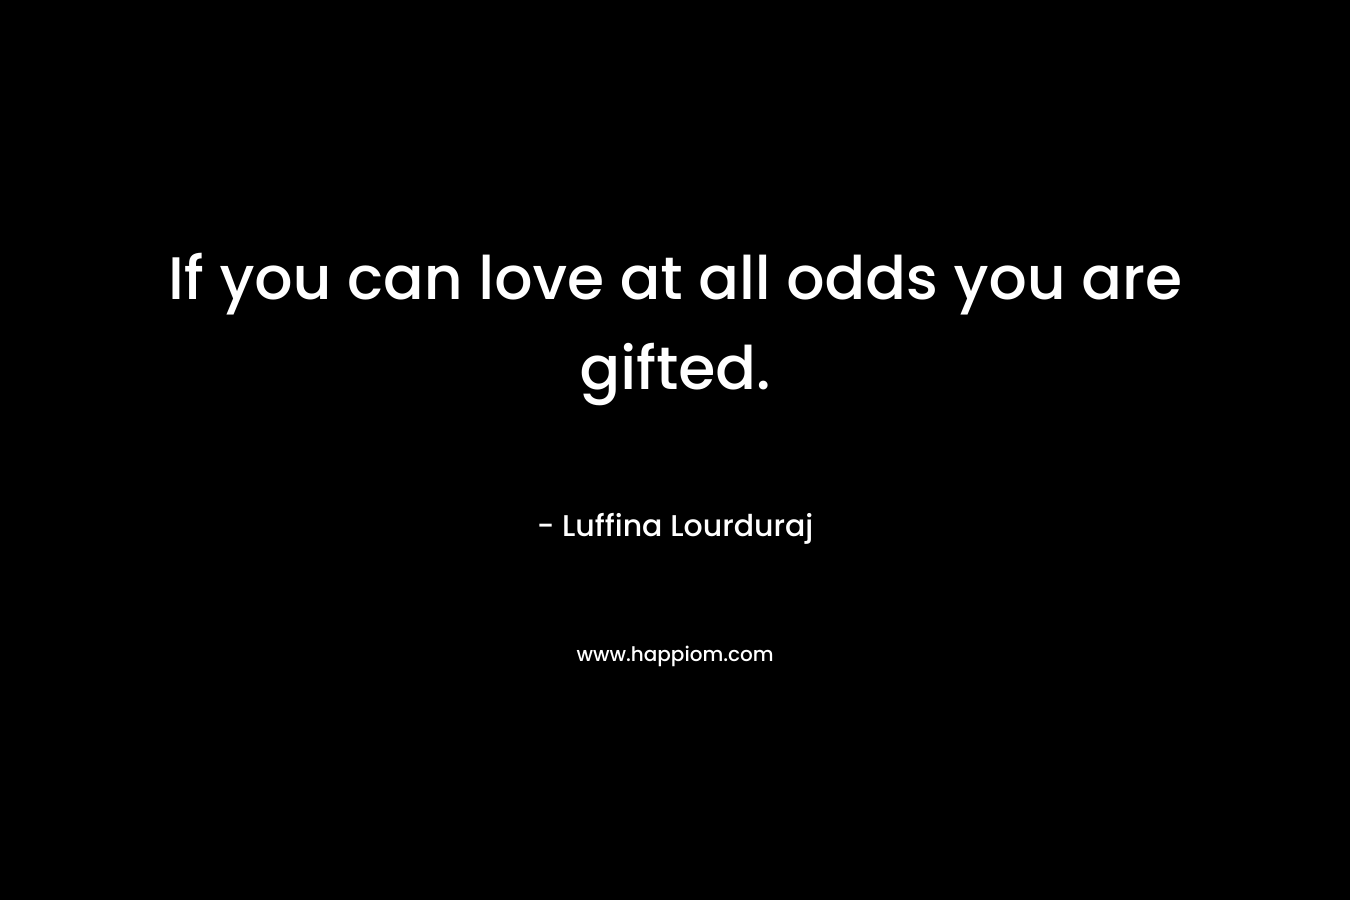 If you can love at all odds you are gifted. – Luffina Lourduraj